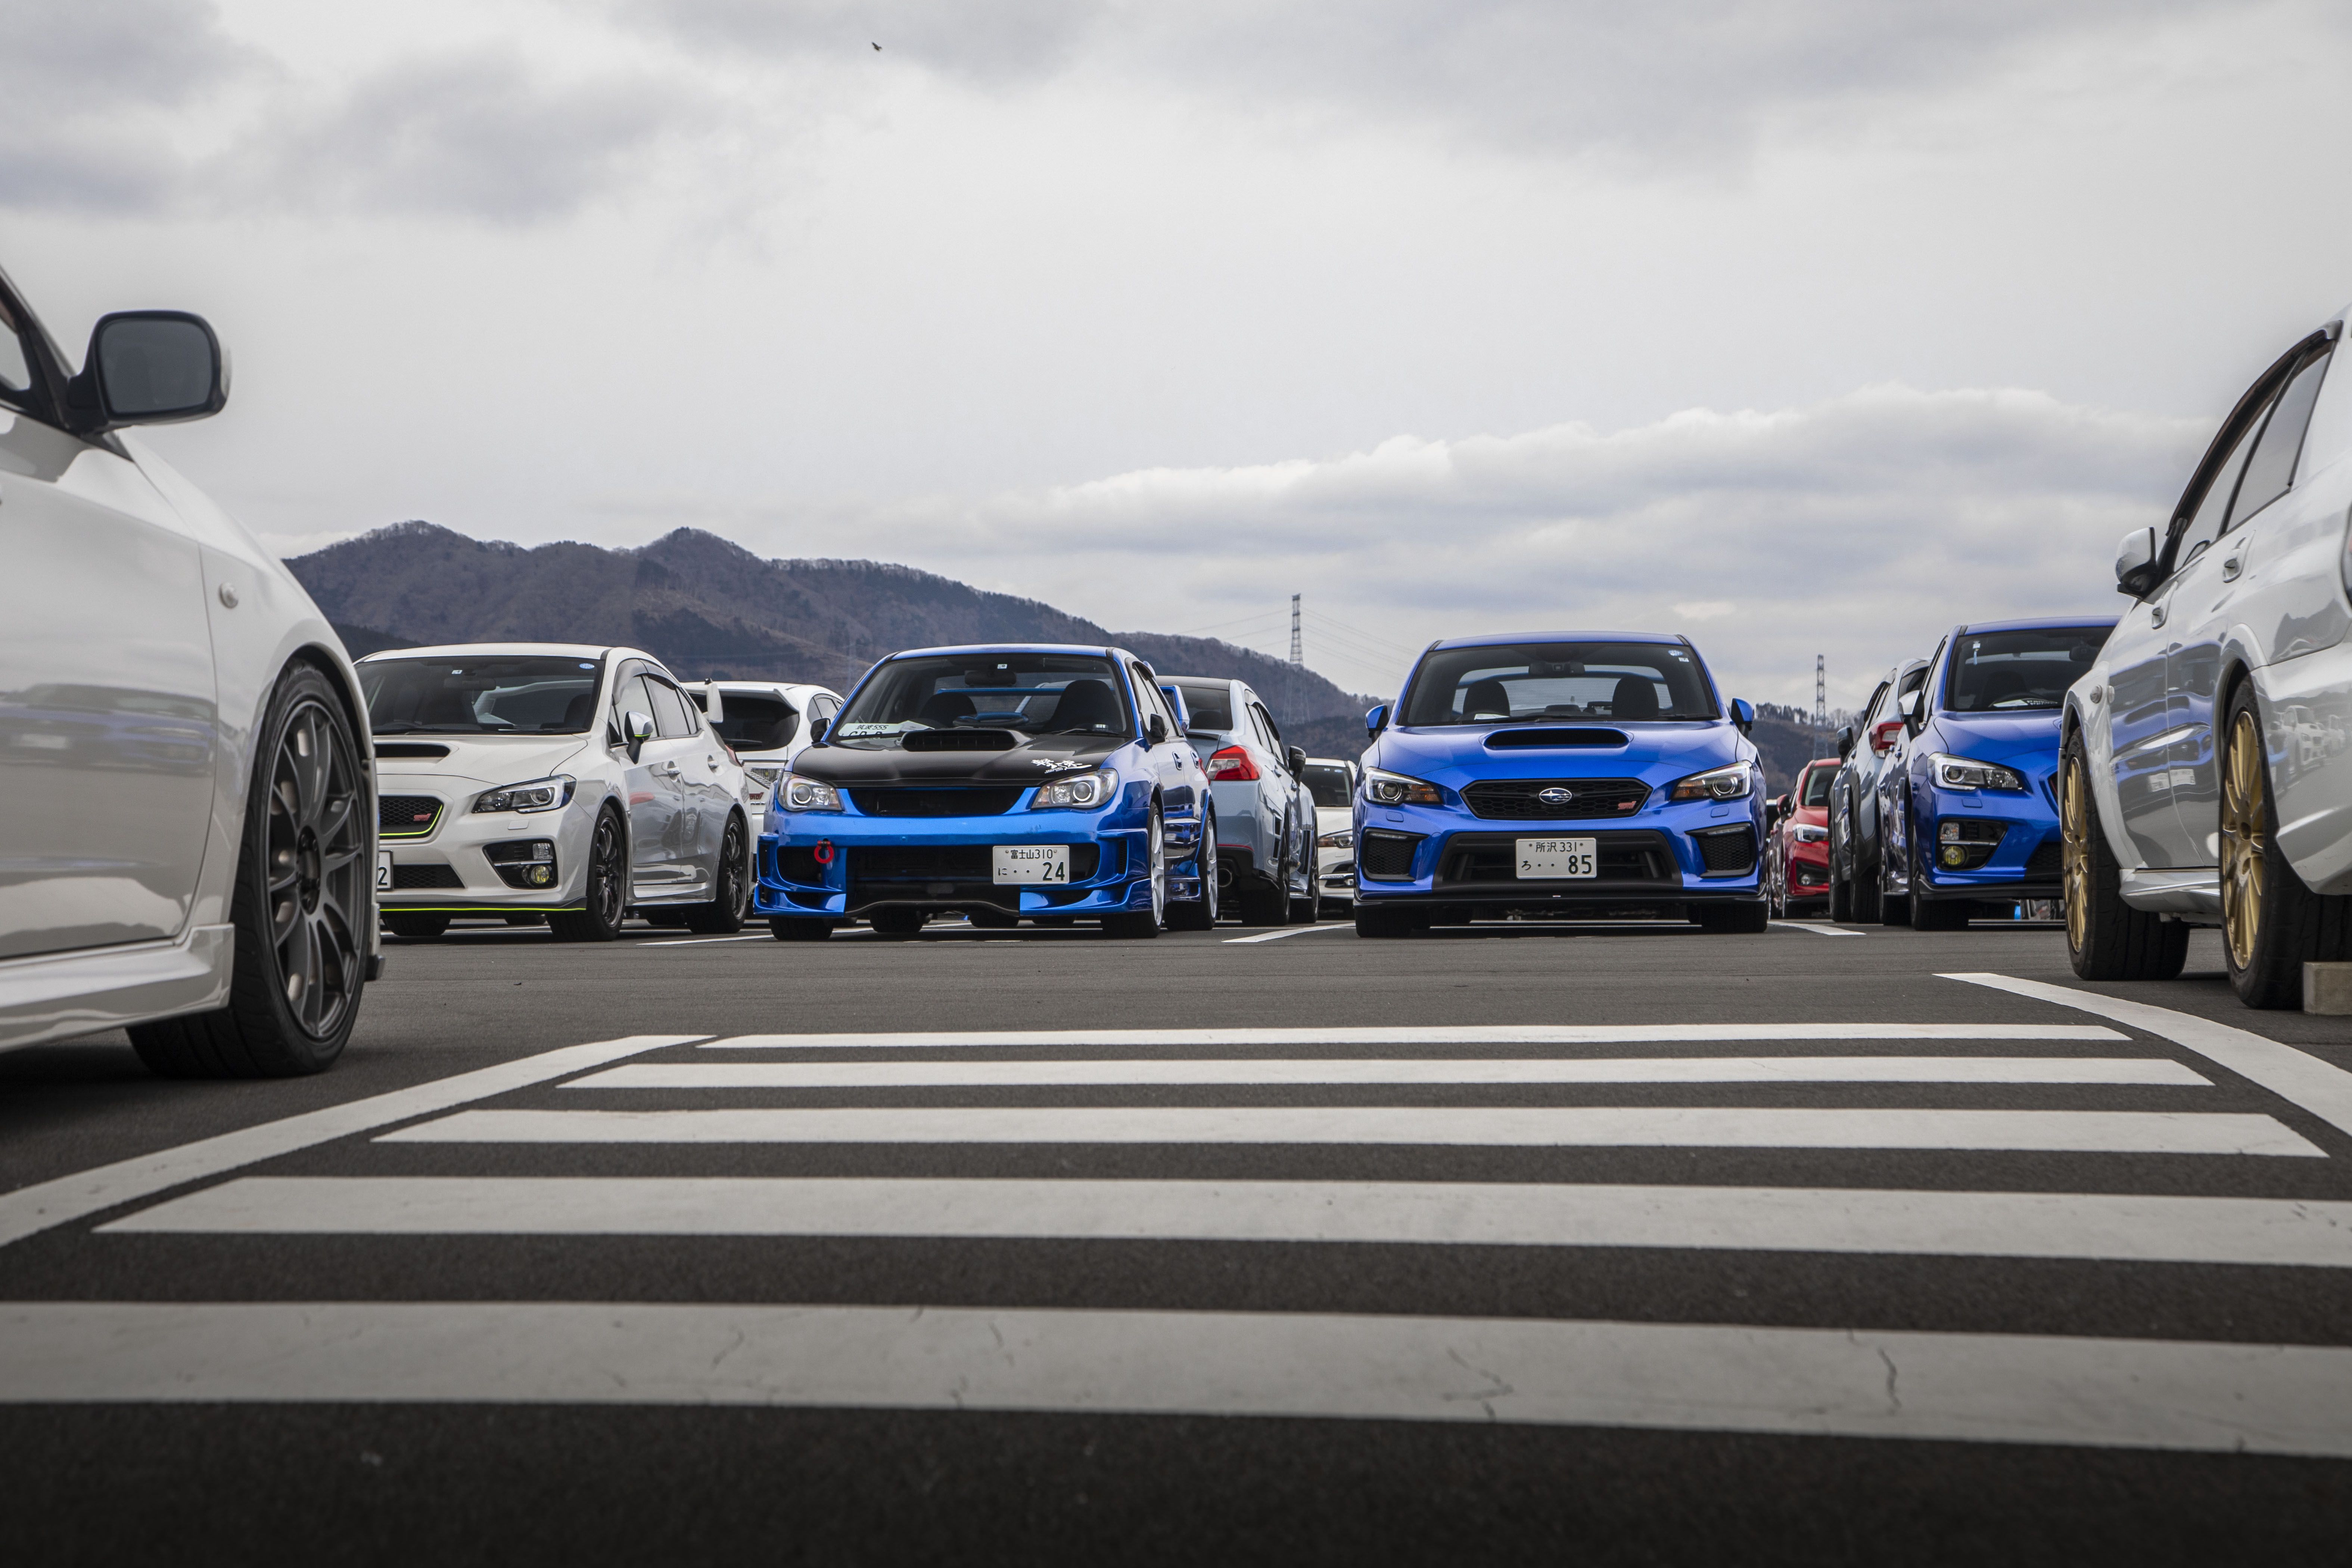 Gallery Subaru Celebrates 31 Years Of Sti With A Party At Fuji Speedway